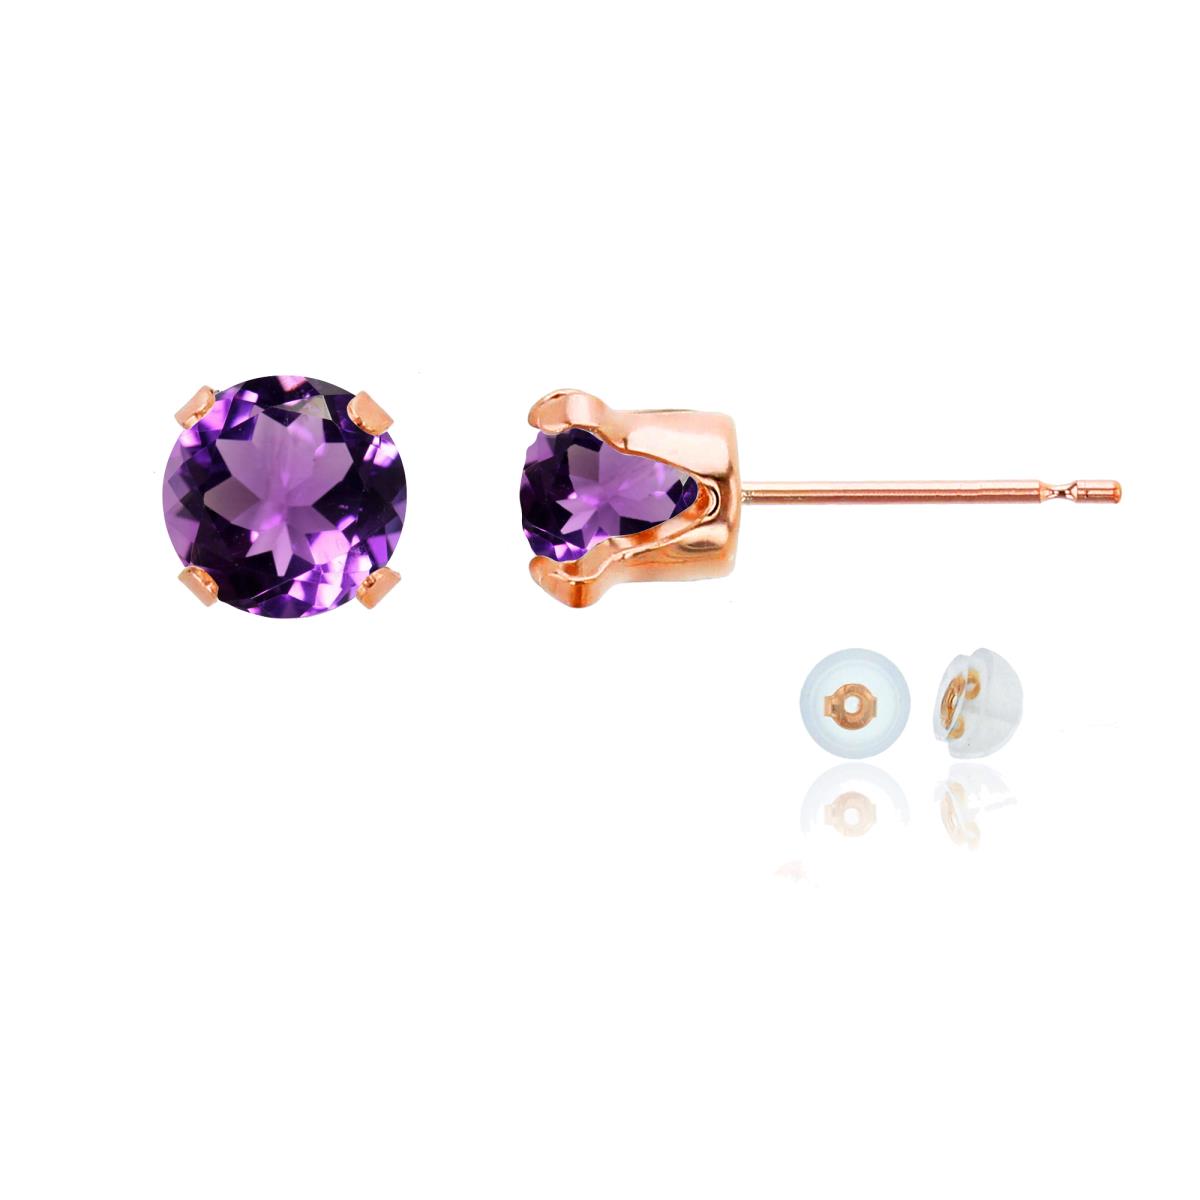 10K Rose Gold 6mm Round Amethyst Stud Earring with Silicone Back